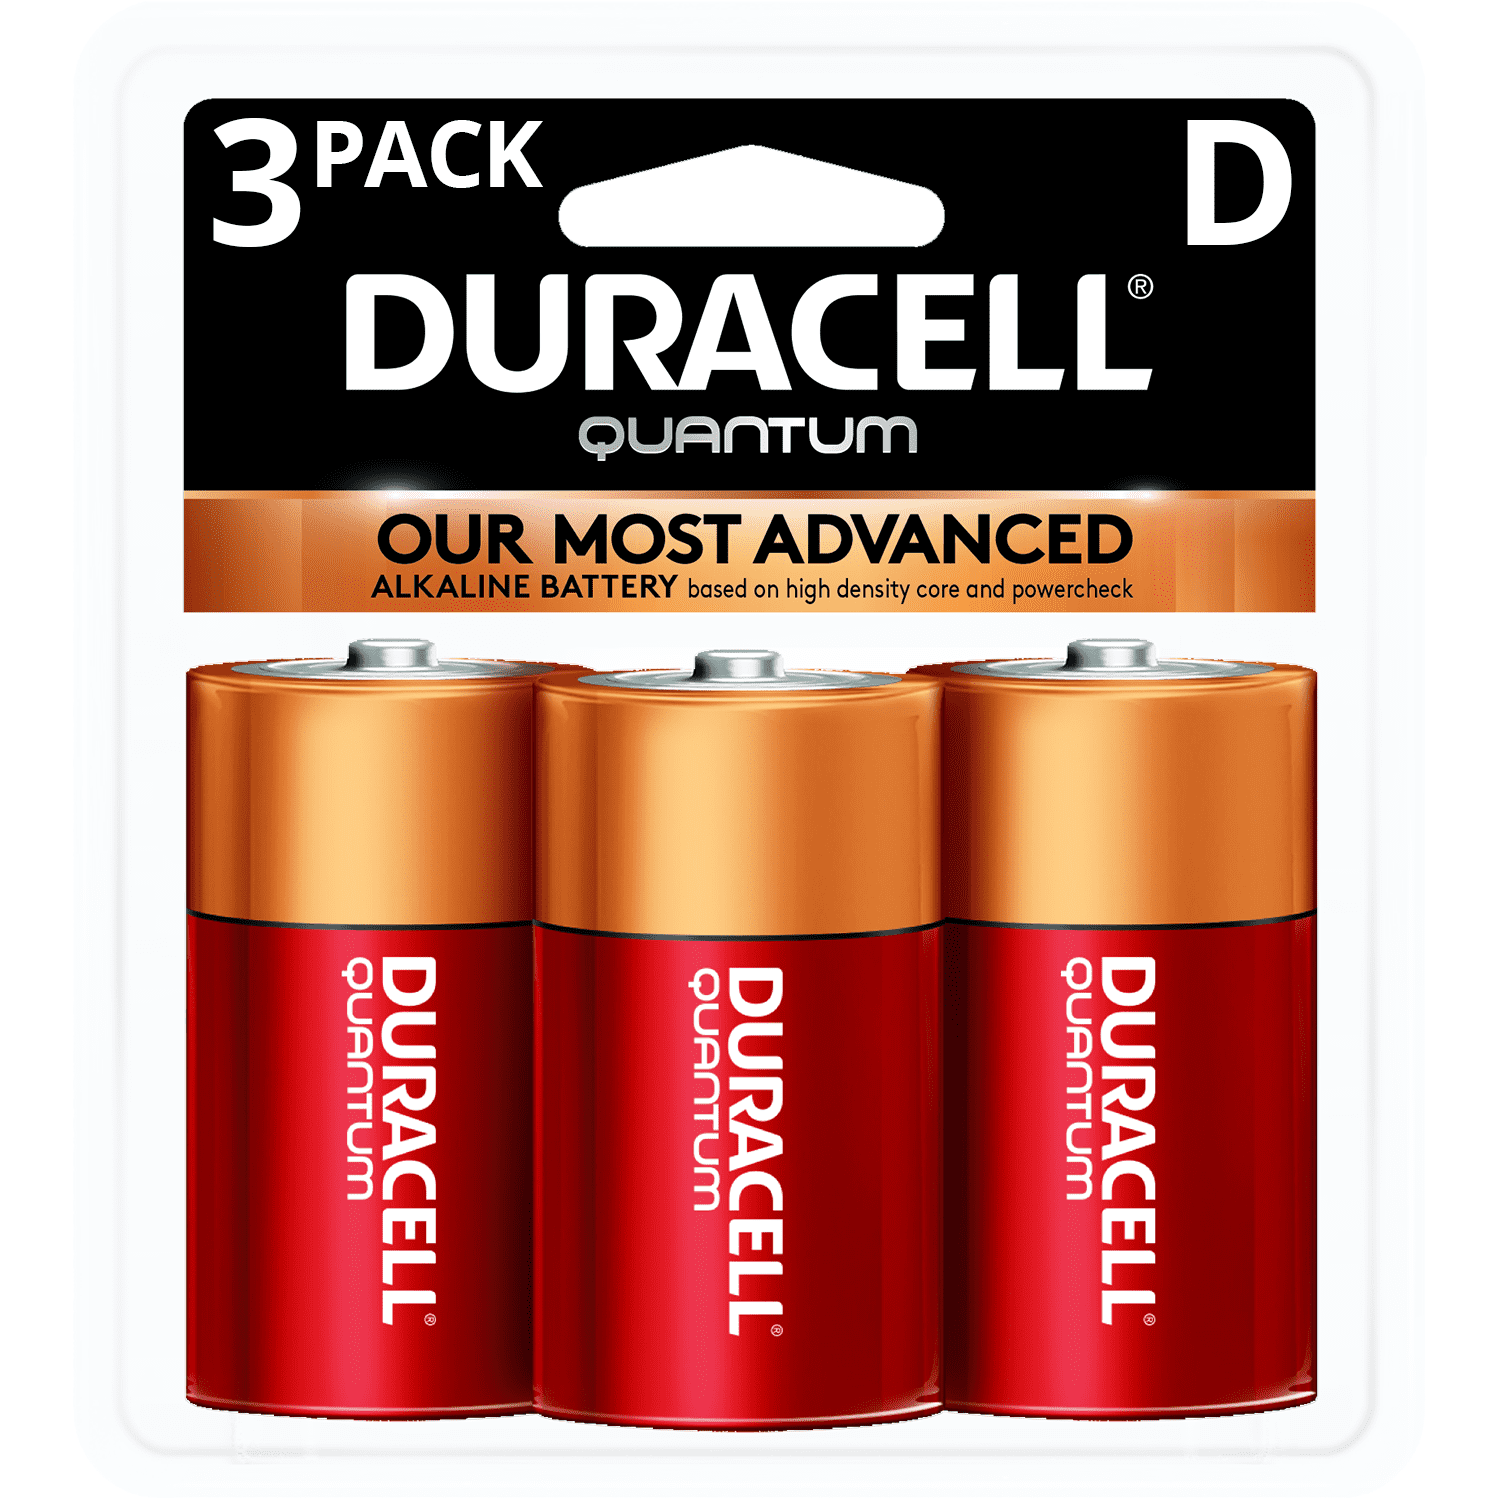 What Is The Warranty On A Duracell Car Battery